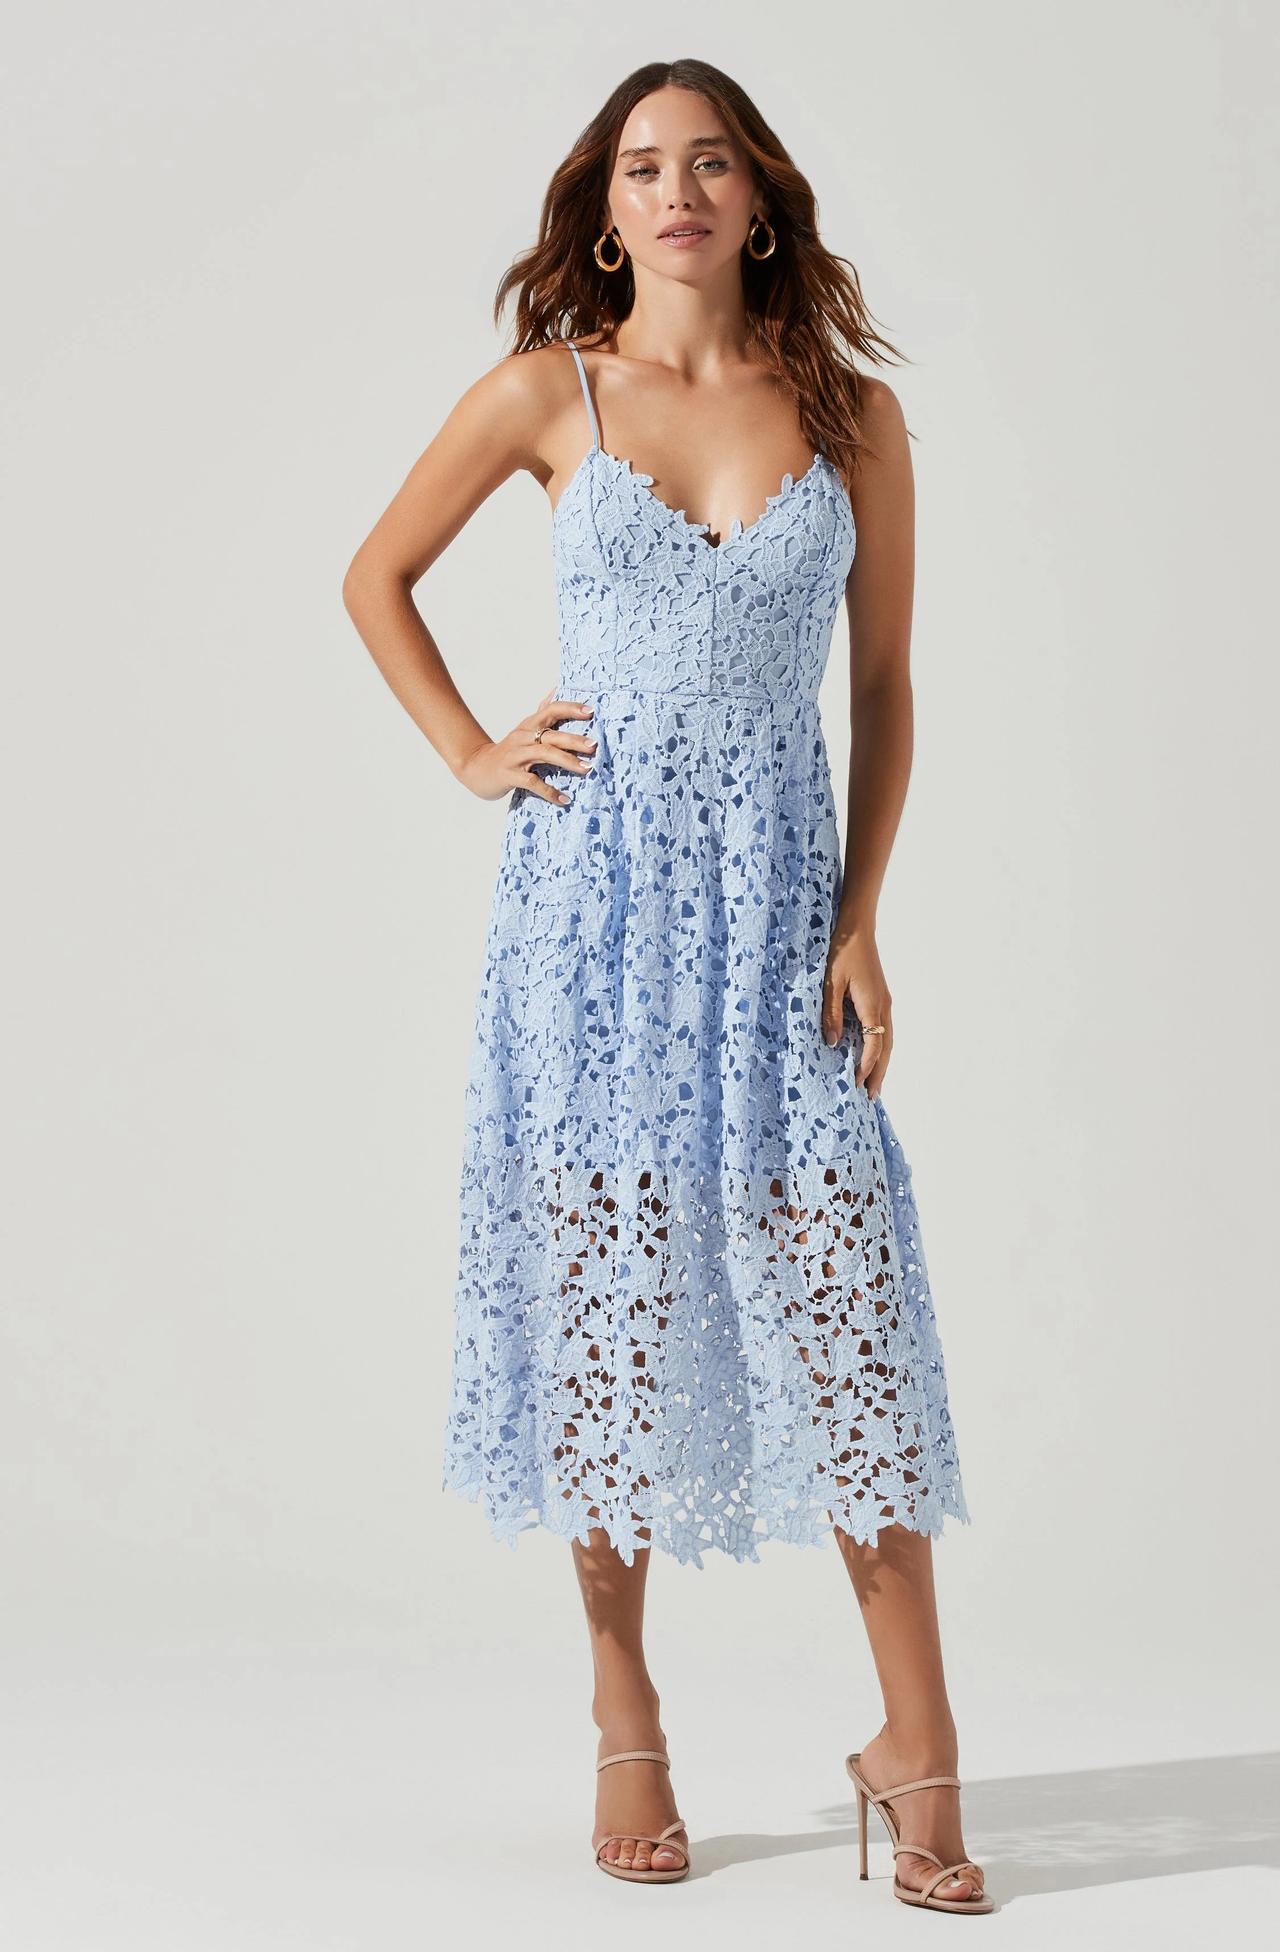 The Best Wedding Guest Dresses for Summer 2022